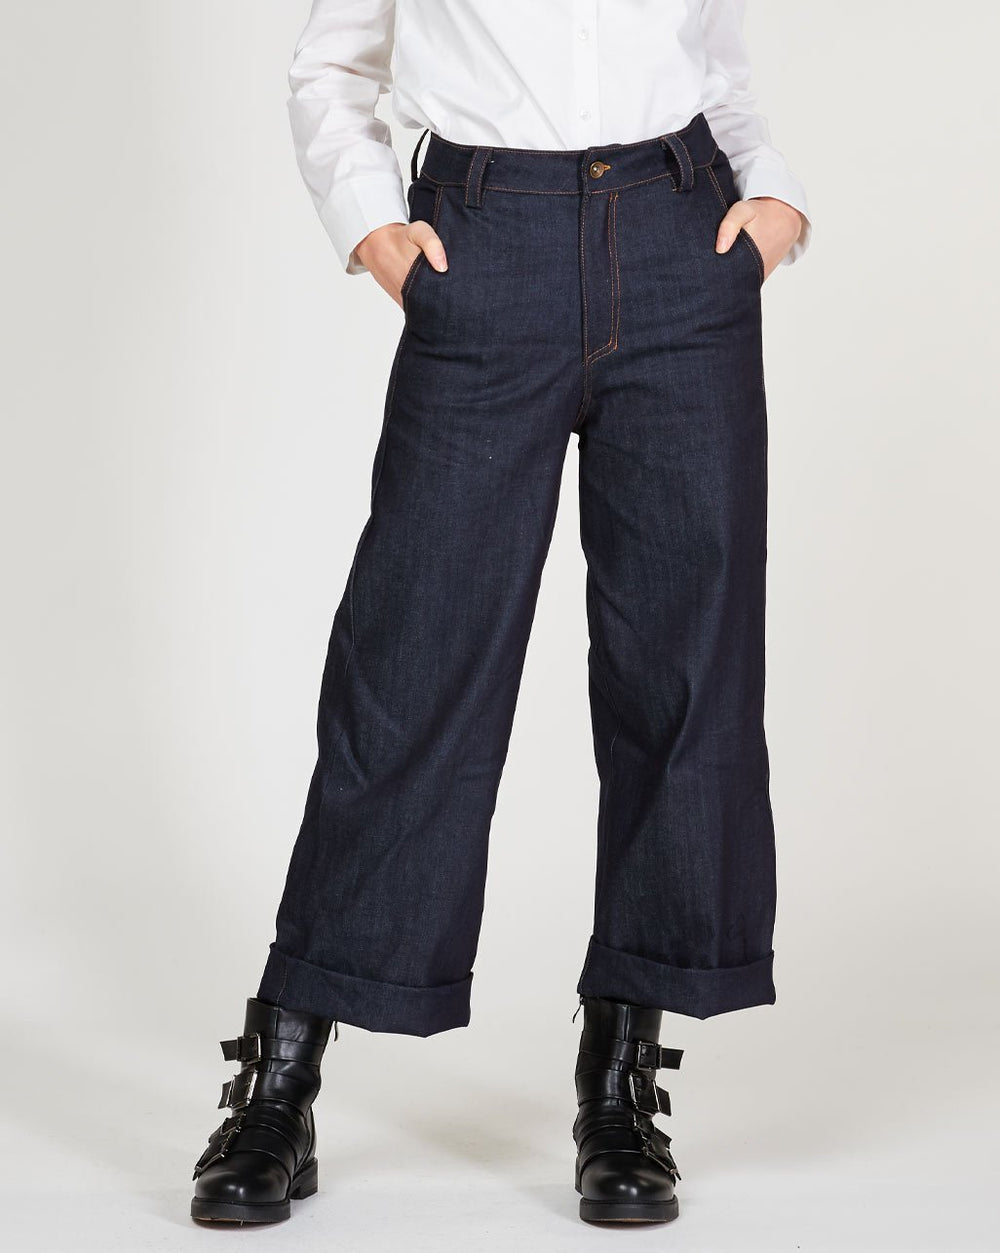 Wide Leg Cuffed Denim Trousers
Our Classic Wide Leg Pants are essential this season. Will add sophisticated flare to any look while remaining comfortable and super chic. Details: Mid-rise Button Closure Wide bottoms Full length Fit: Wide fit Fabric: Organic-dyed, medium weight, sturdy cotton with a soft and refined finish. Made in Italy
Wide Leg Cuffed Denim Trousers
Classic Wide Leg Pants are essential this season. Will add sophisticated flare to any look while remaining comfortable & super chic. Mid-rise,